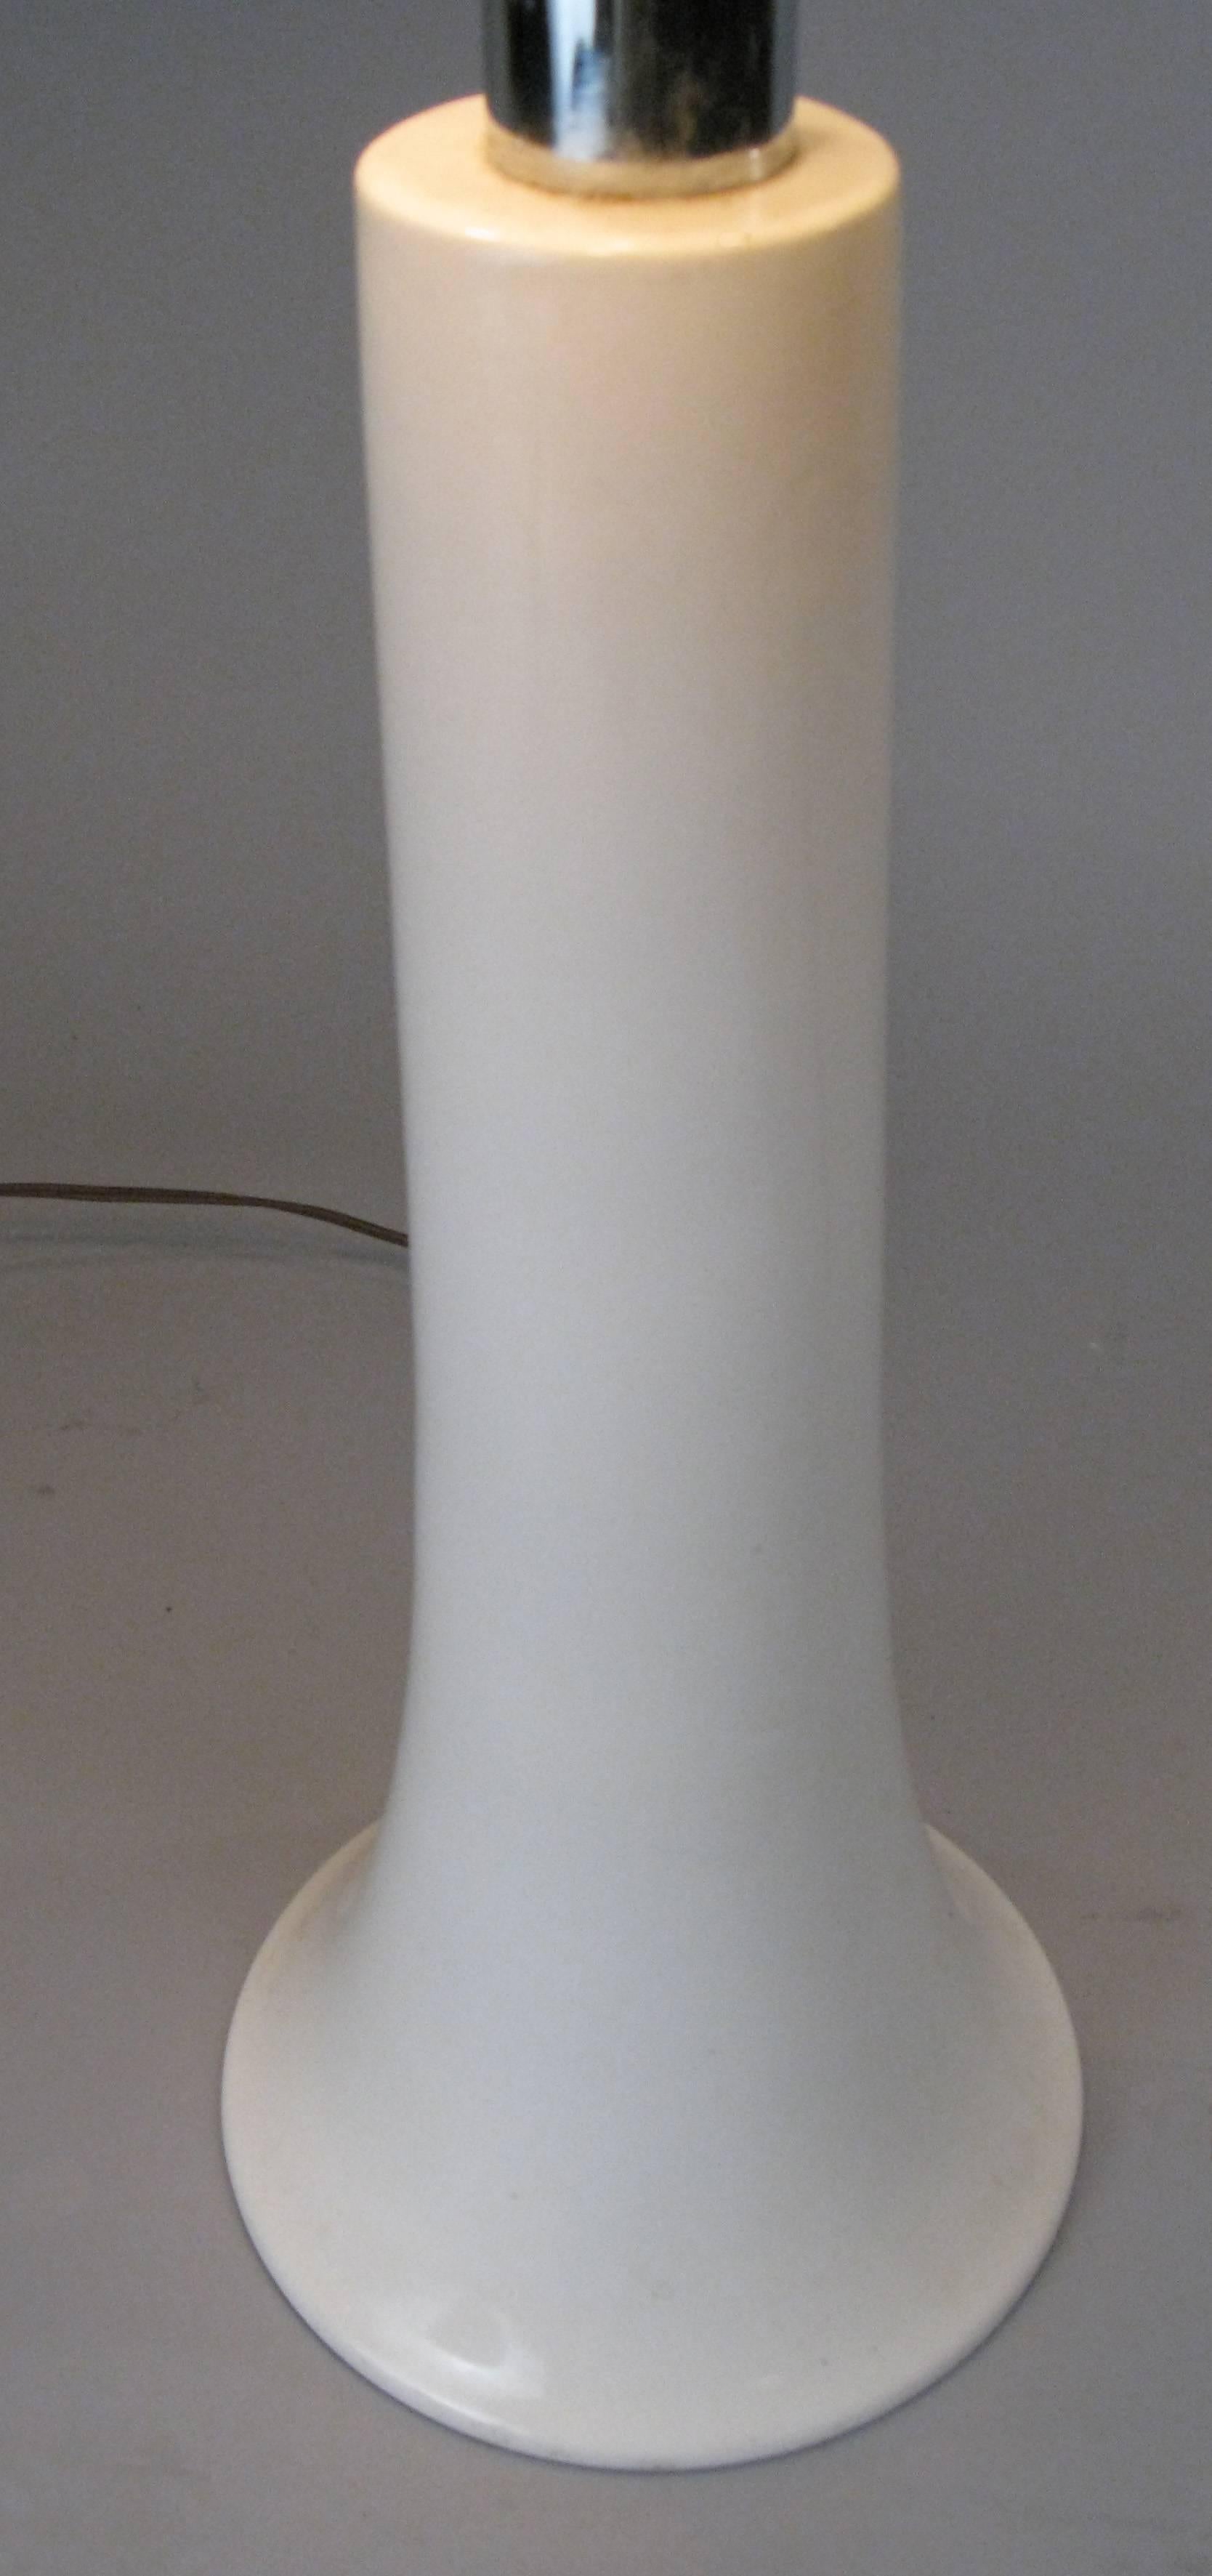 A very handsome vintage 1950s, Italian table lamp with spare cylindrical white ceramic center with a flared base. With fitting for 3 bulbs for varying degrees of light, and with its original metal shade with brown flocked surface. A very unique and